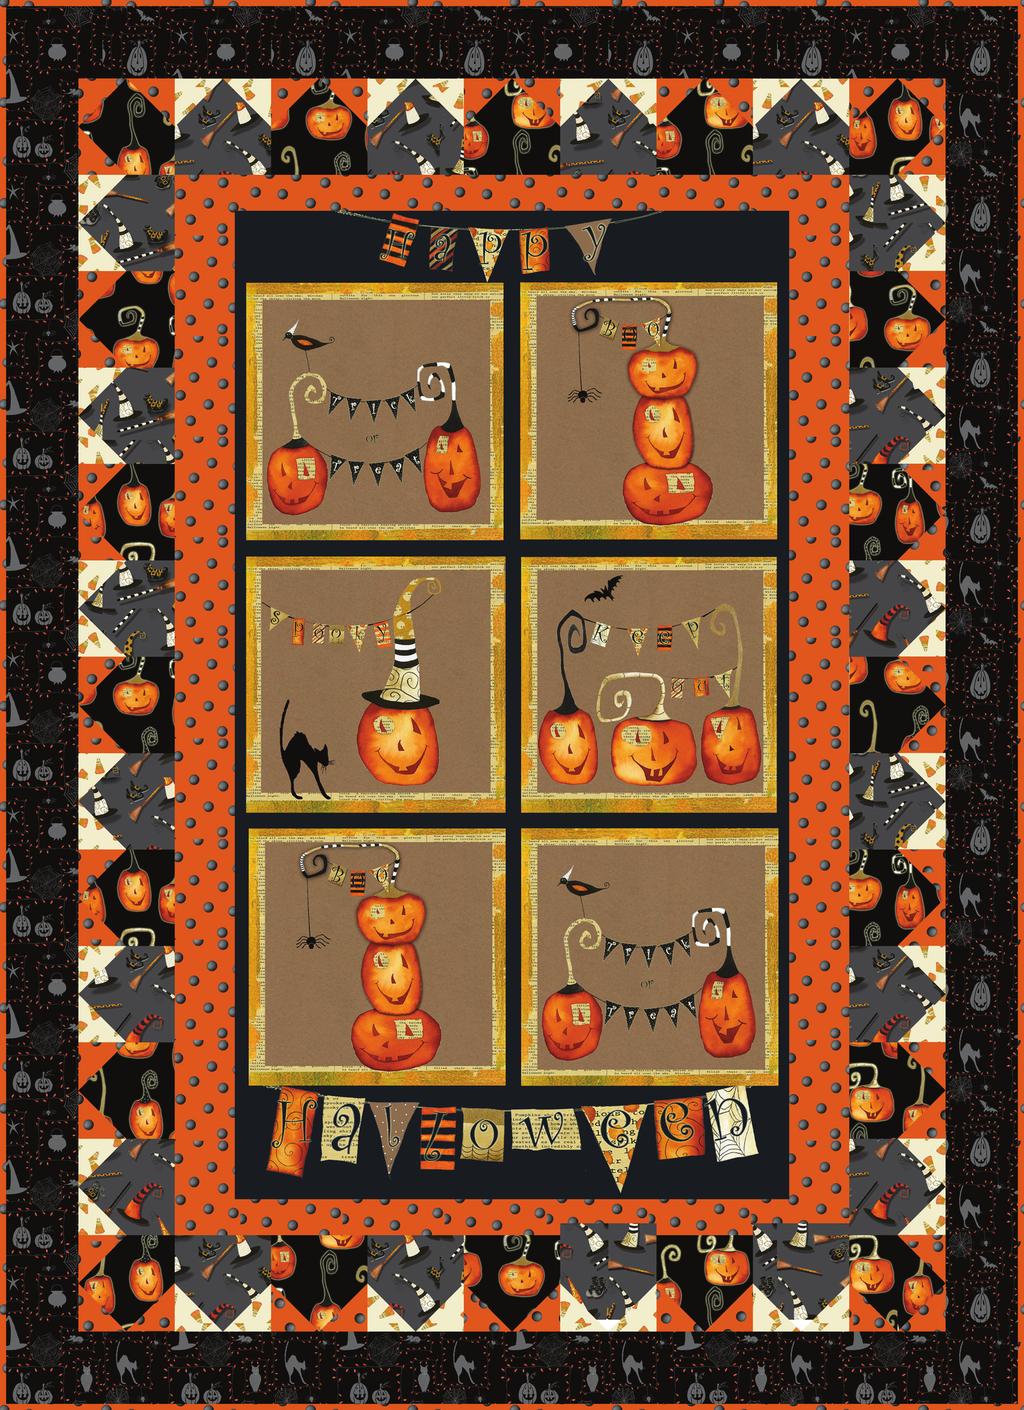 Cheeky Pumpkins Wall Hanging Featuring fabrics from the Cheeky Pumpkin collection by DT-K for Fabric Requirements (A) 2960P-99... (B) 2963-30... (C) 2966-99... (D) 2961-90... (E) 2965-44.